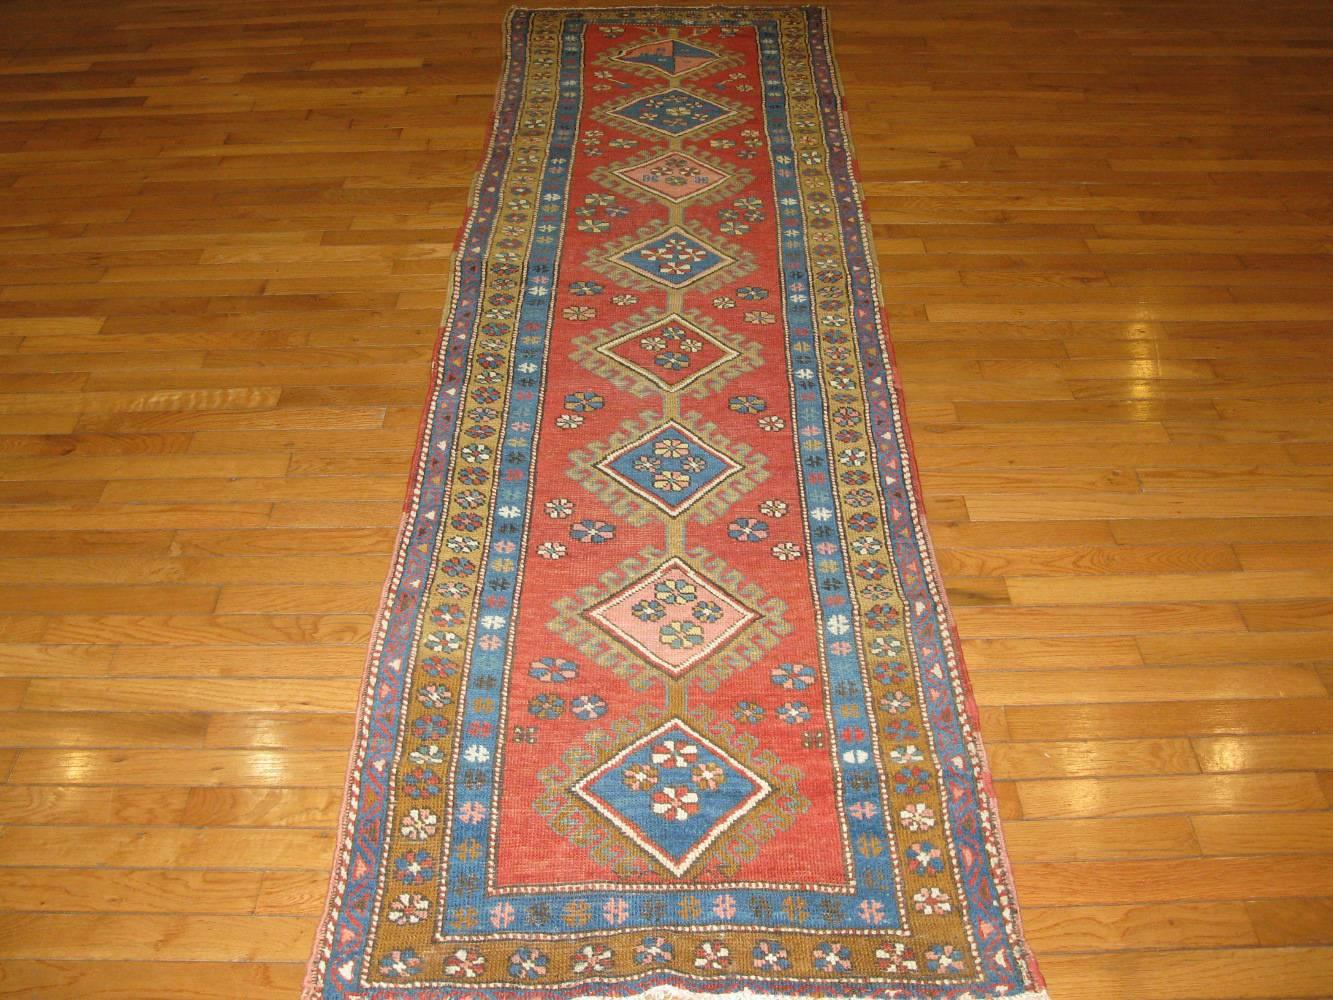 This is a beautiful and rare antique hand-knotted Persian Bakhshayesh runner rug in the traditional geometric design with multiple medallions on a soft red field. This is a perfect rug for any short hall or space. It measures 2' 7'' x 8' 10'' and in